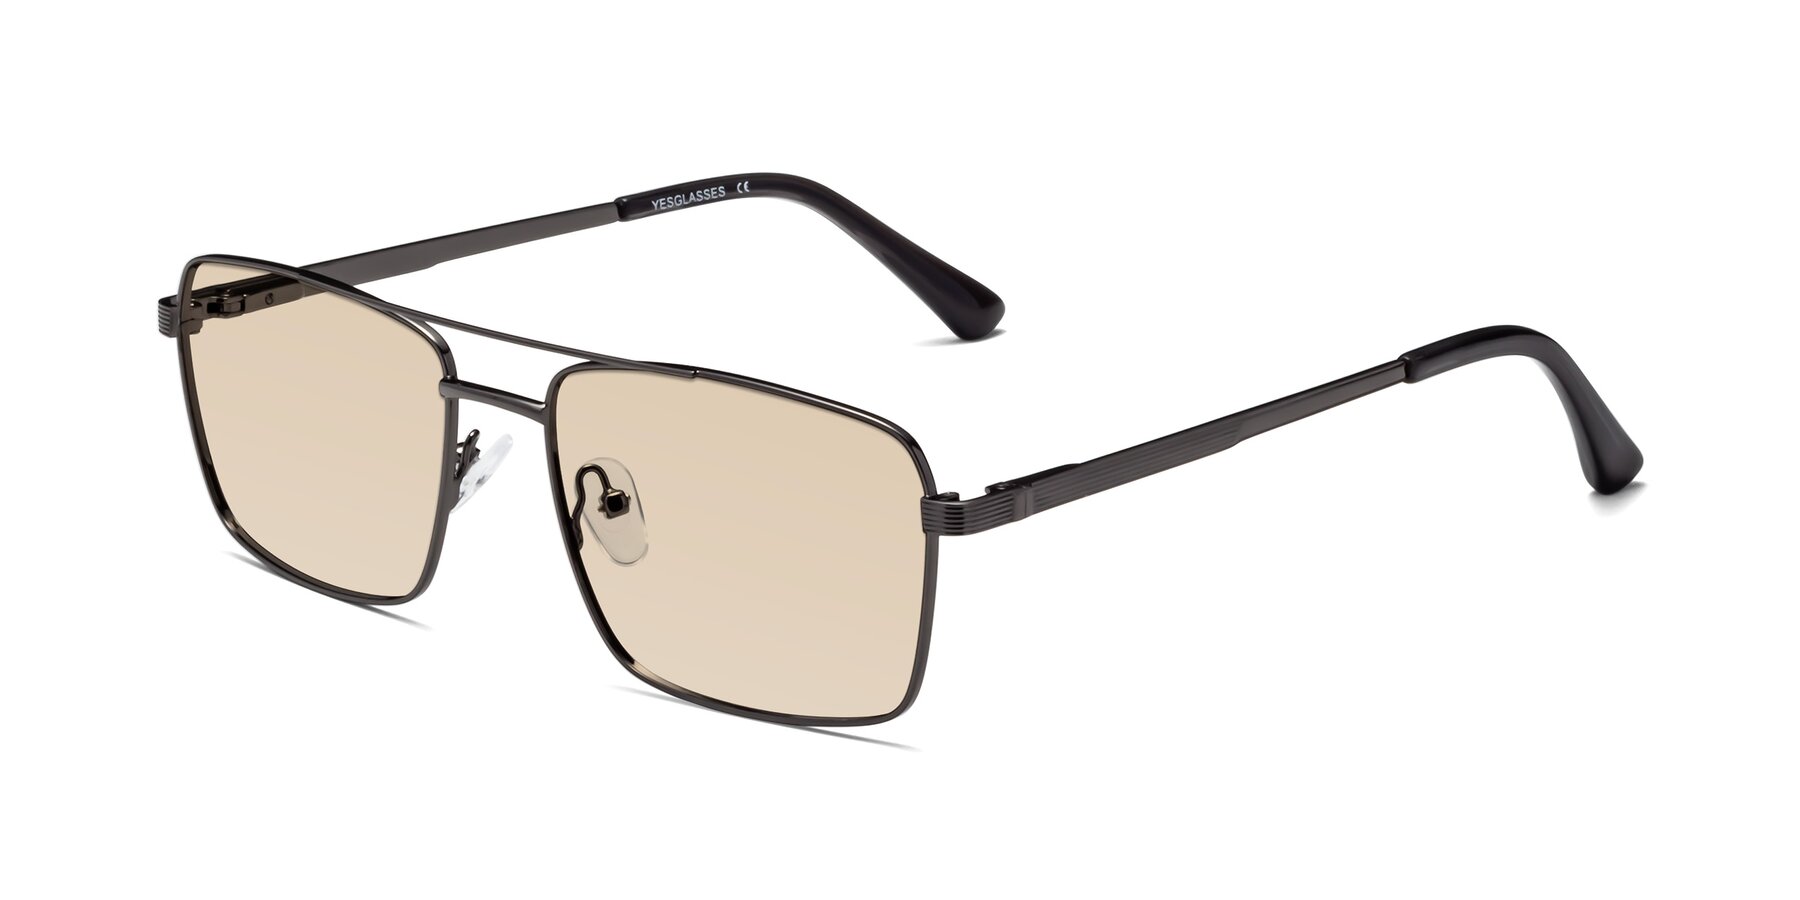 Angle of Beckum in Gunmetal with Light Brown Tinted Lenses